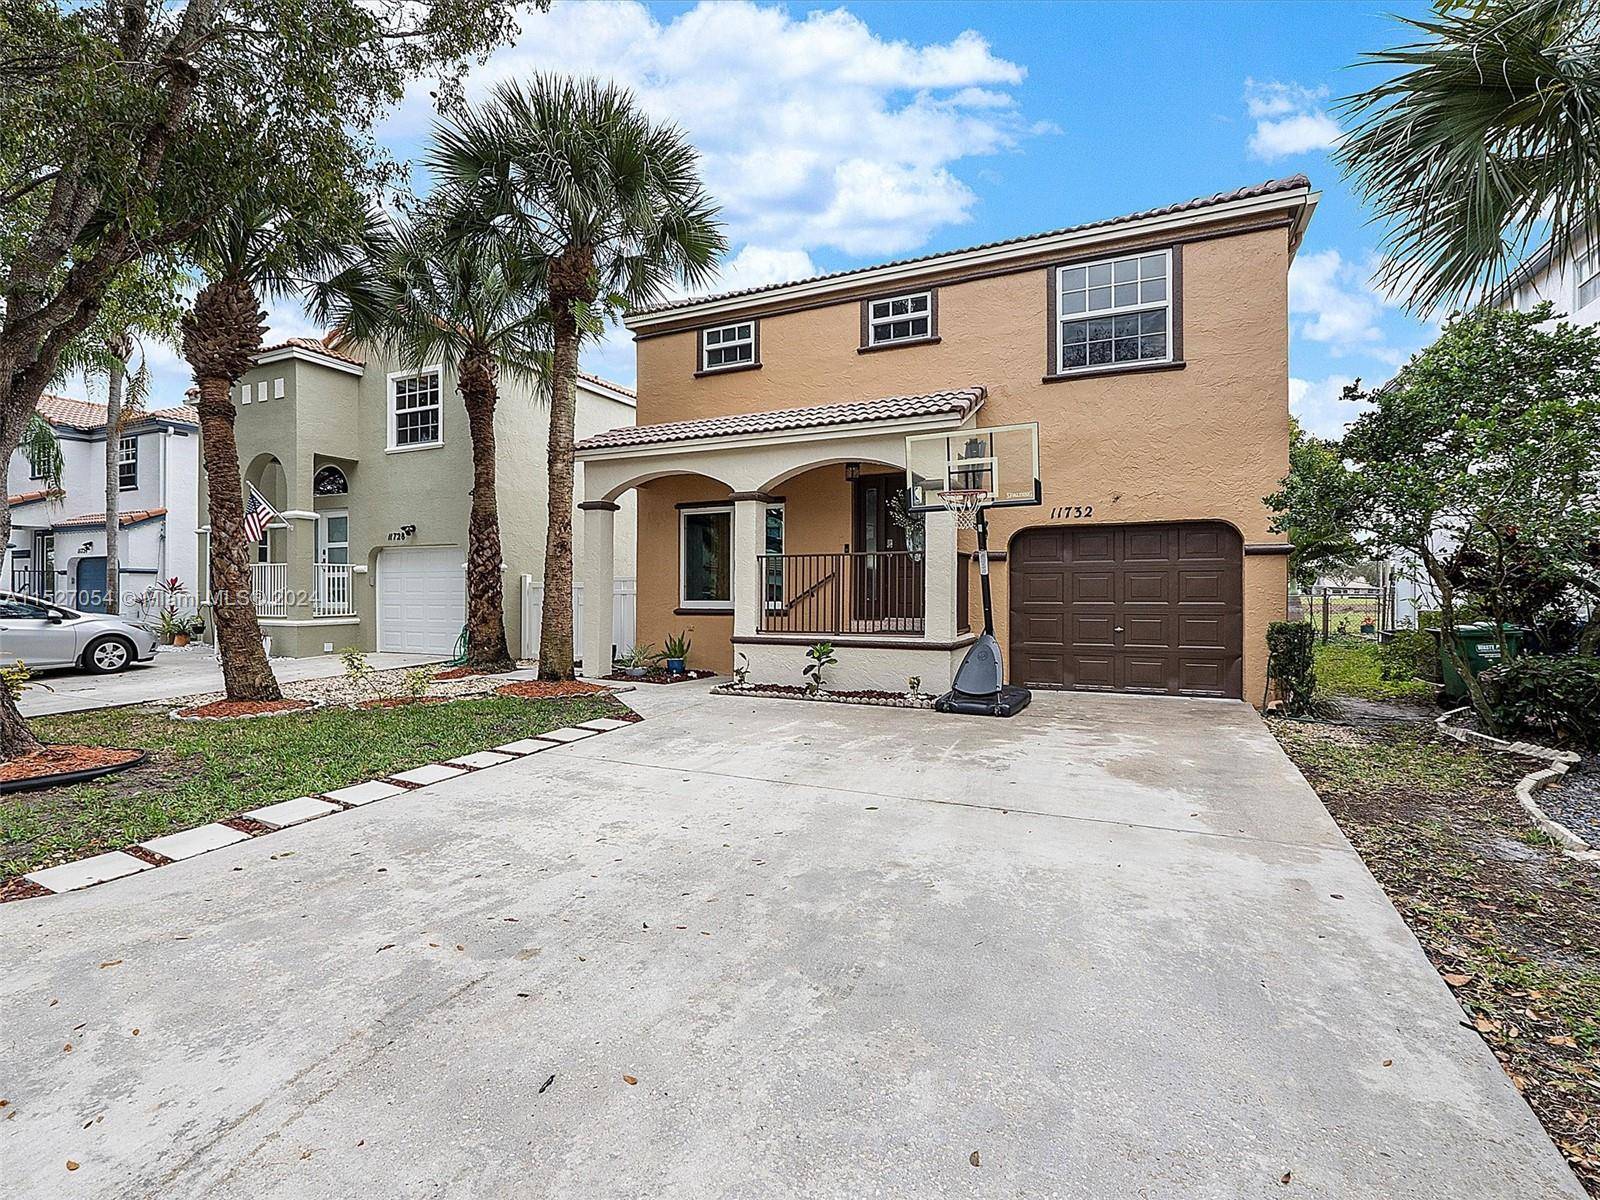 MOTIVATED SELLERS ! Indulge in paradise living at this upgraded AS IS 2 story, 3 bed, 2.